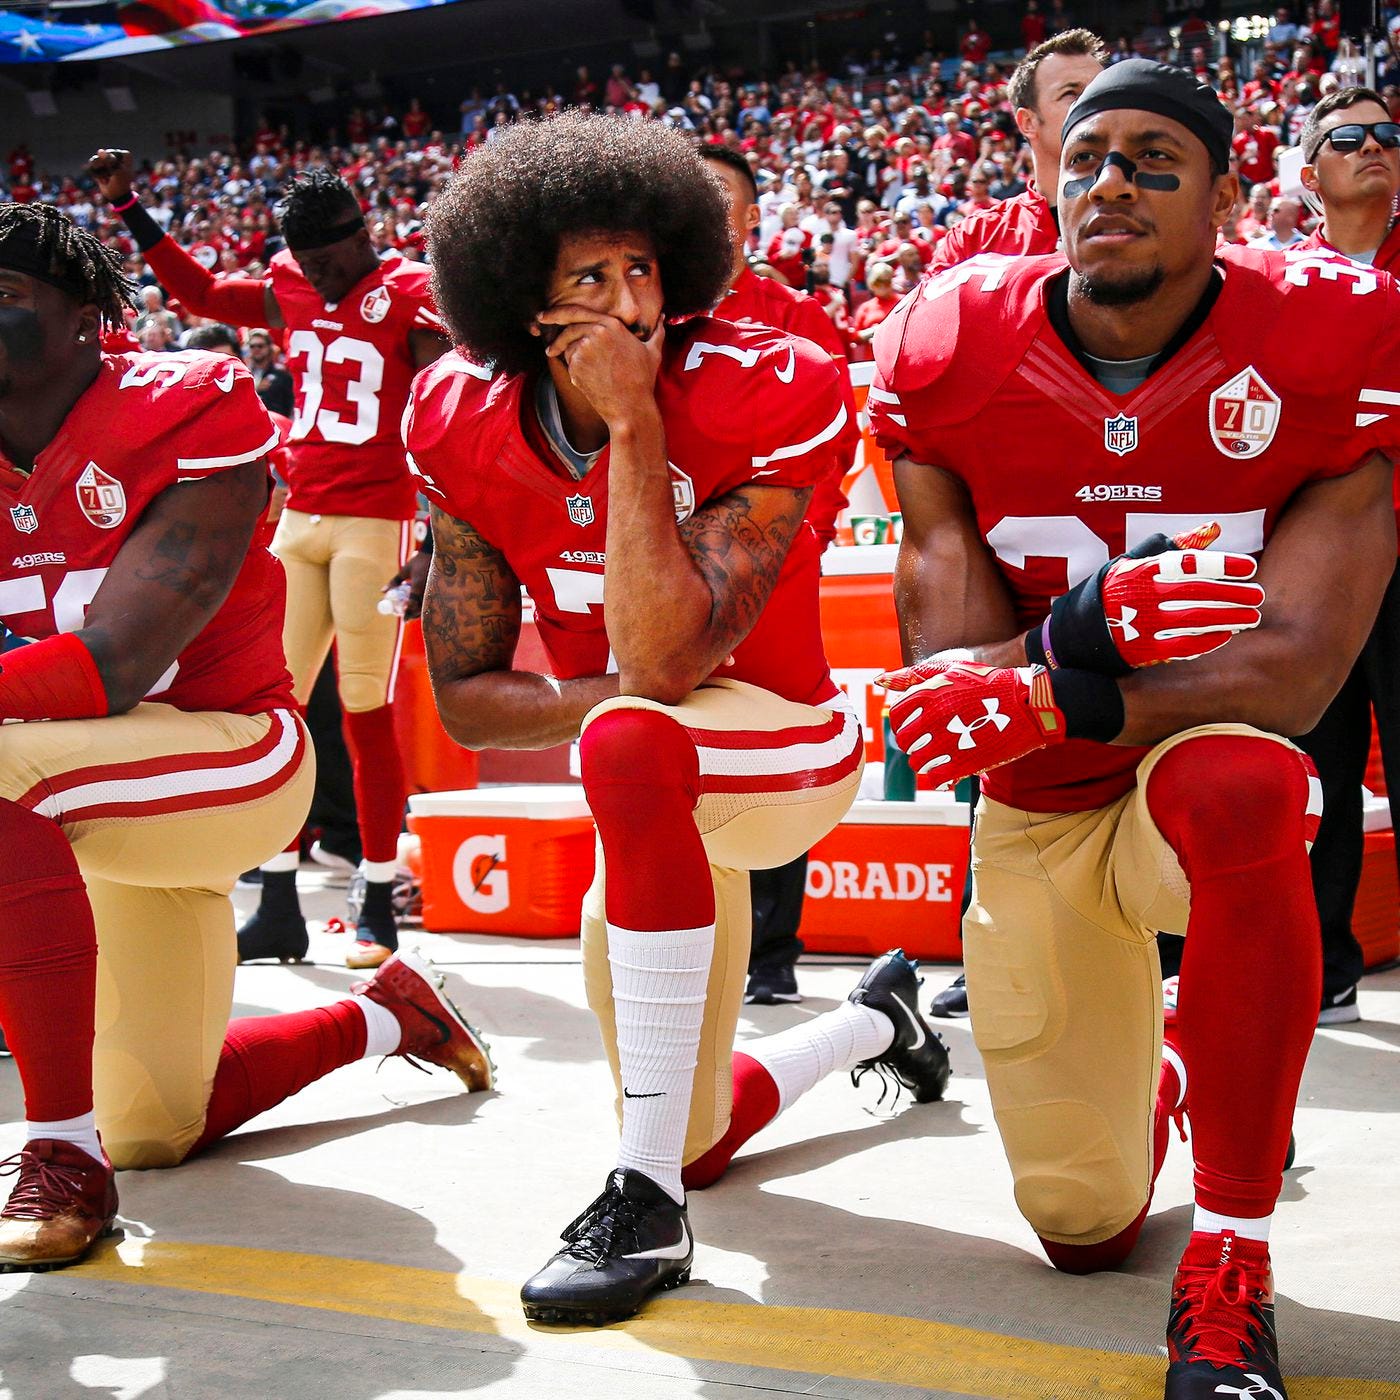 3 years after Kaepernick took a knee, the NFL is back to business as usual  - Vox